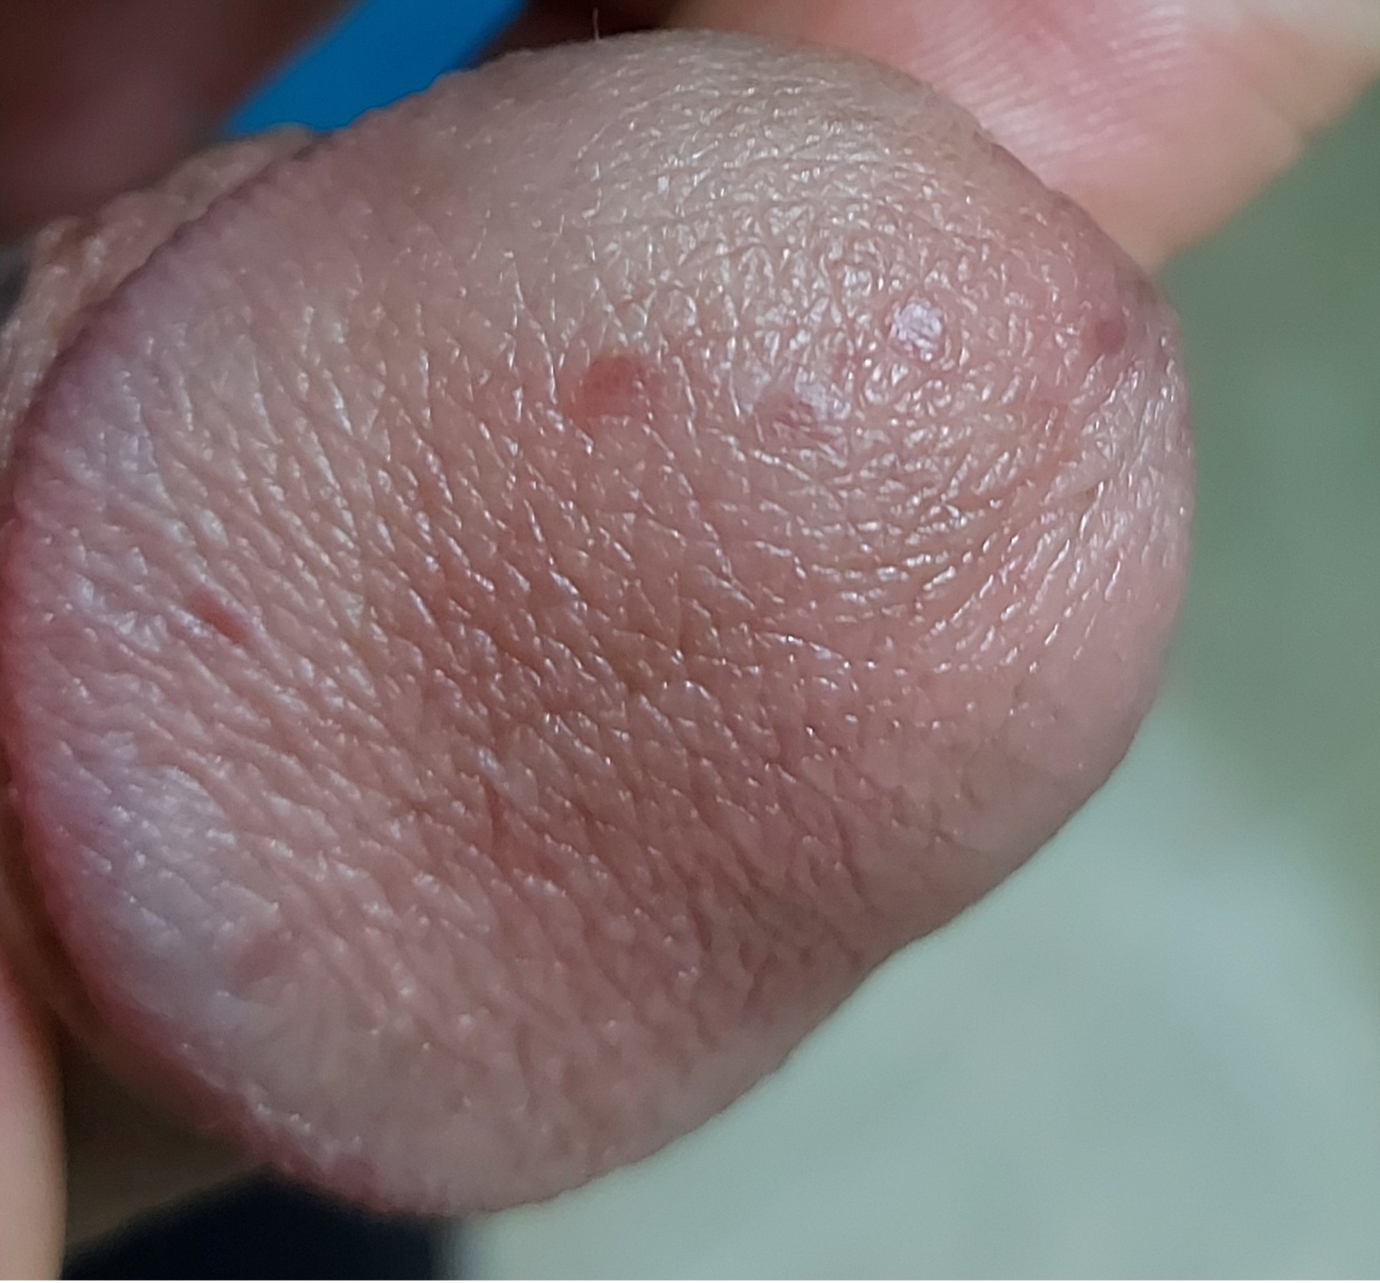 round/oval red spot on head of penis months no treatment is working; please help! Penis Disorders | | Patient